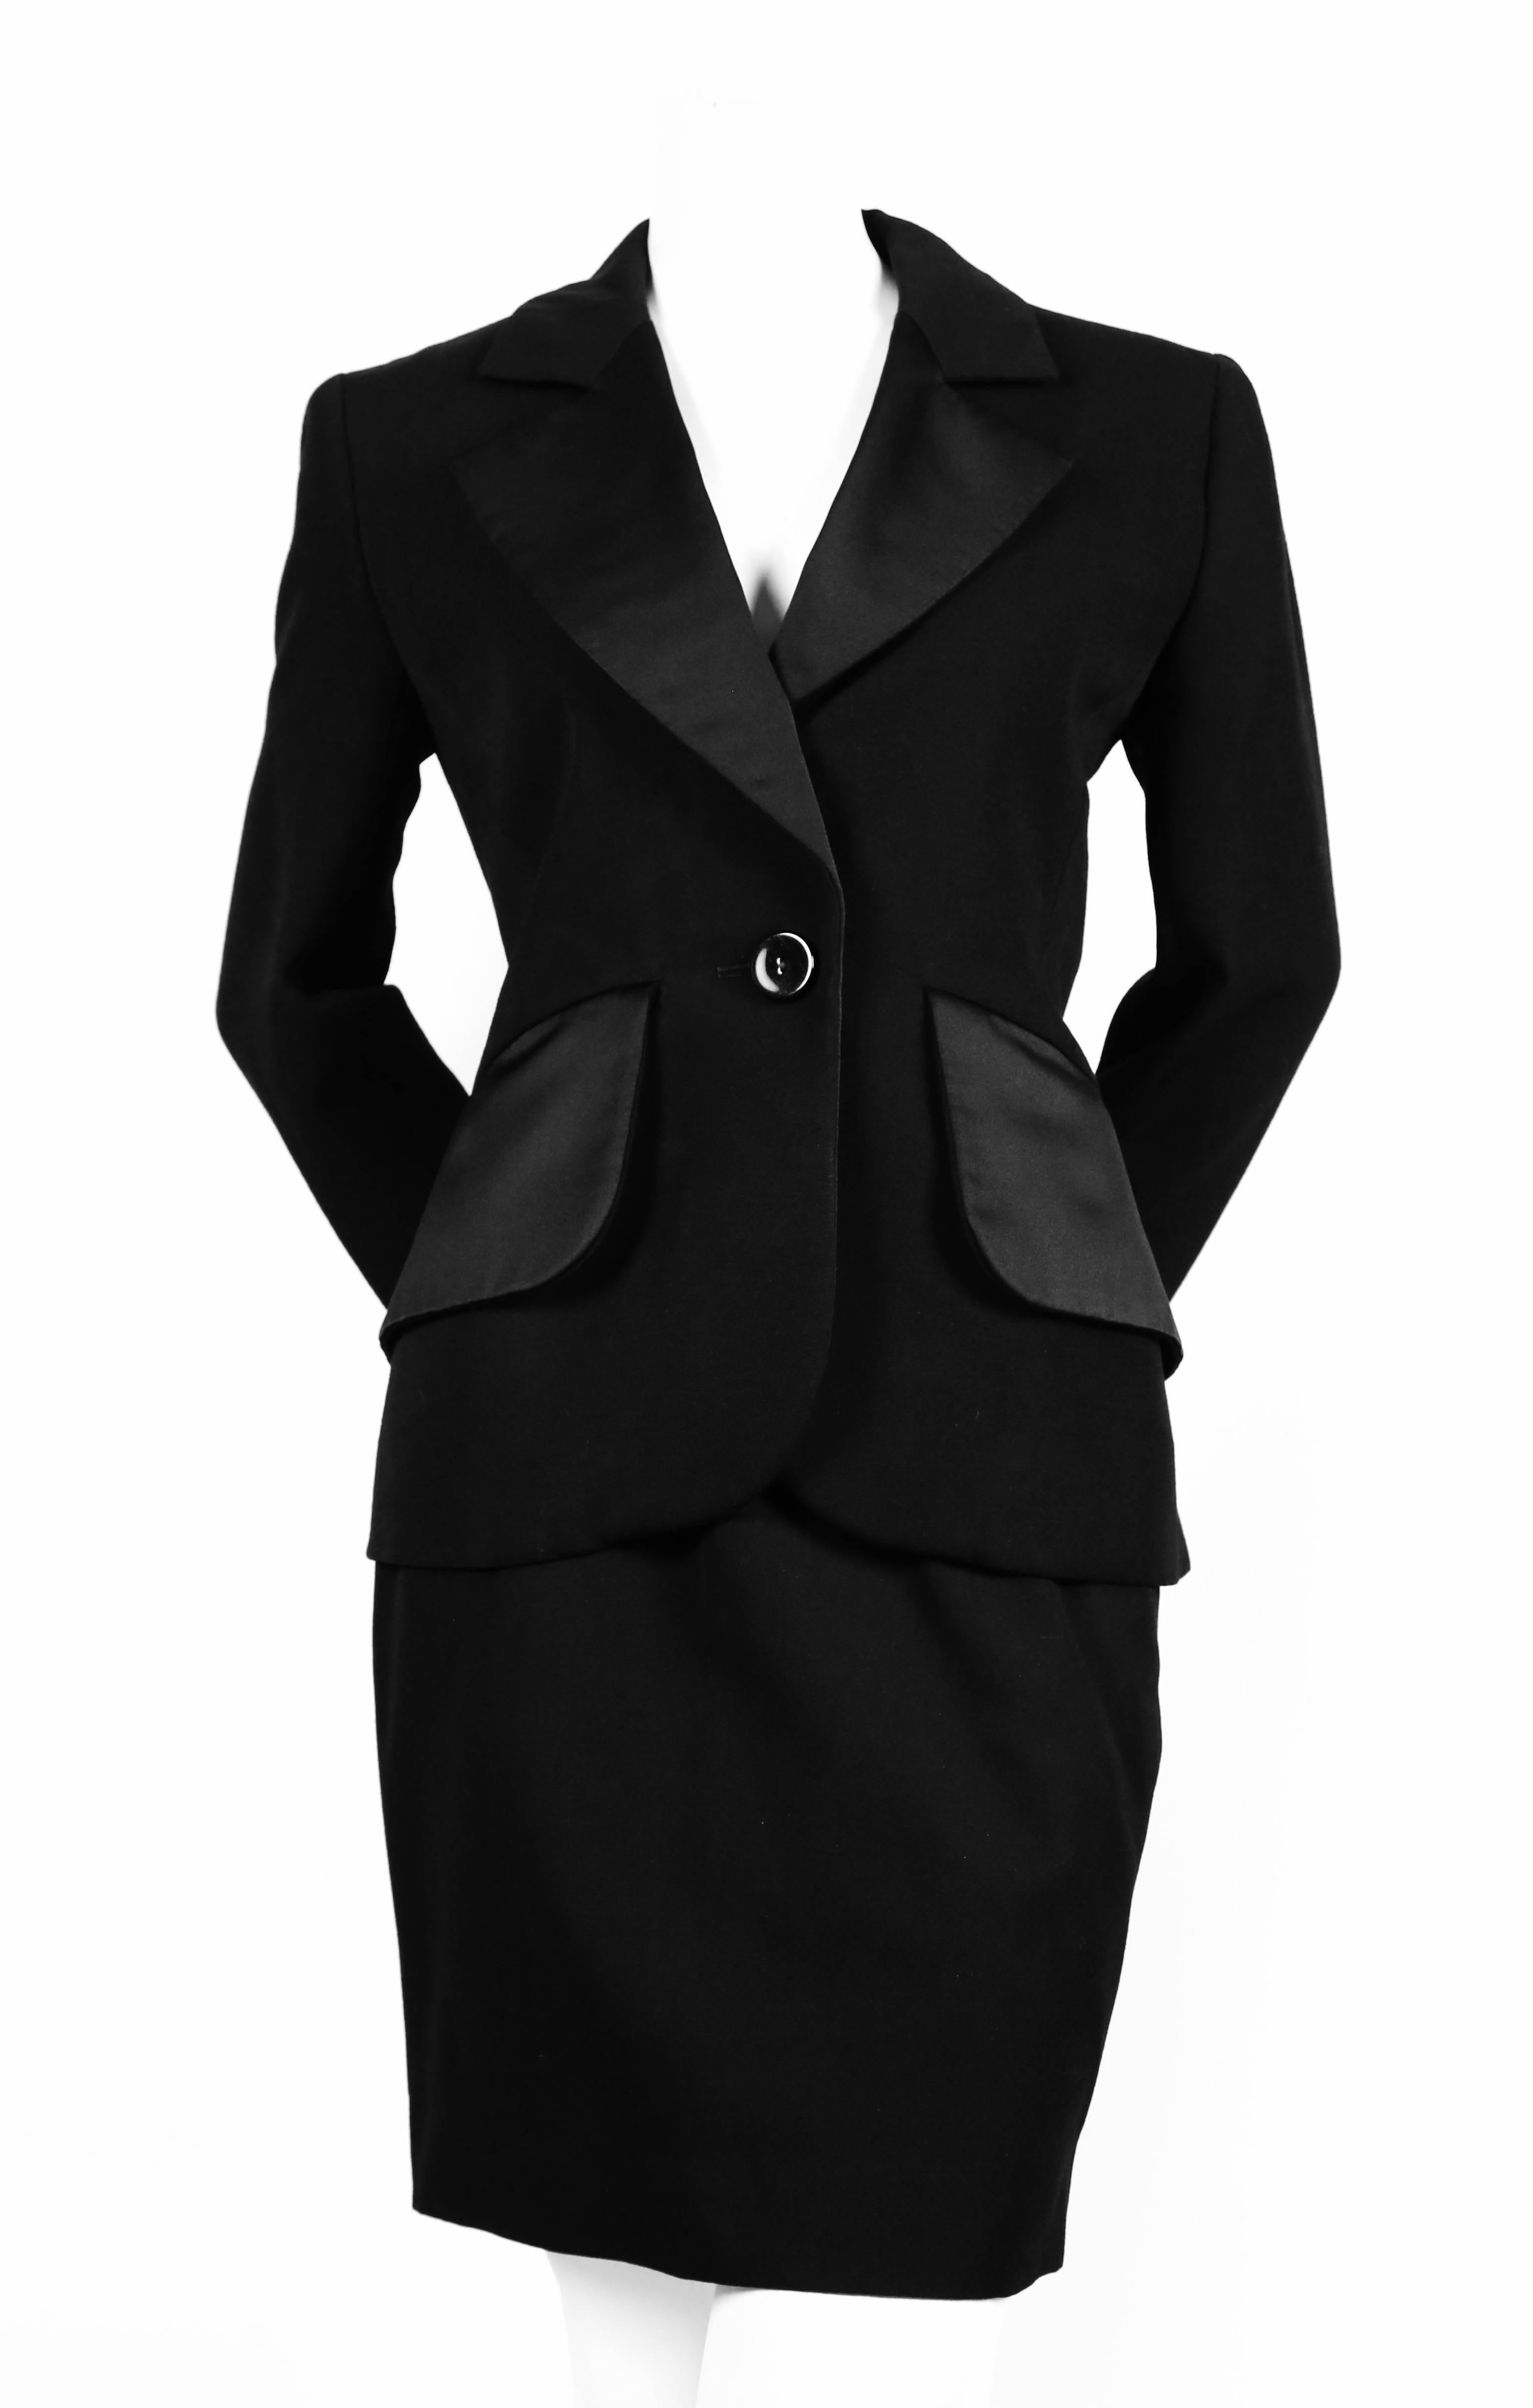 Very rare classic jet black three piece 'le smoking' suit from Yves Saint Laurent dating to the 1980's. Jet black mid weight wool with satin trim. Included is a matching jacket, skirt and pants. Jacket is labeled a French size 36 and skirt/pants a